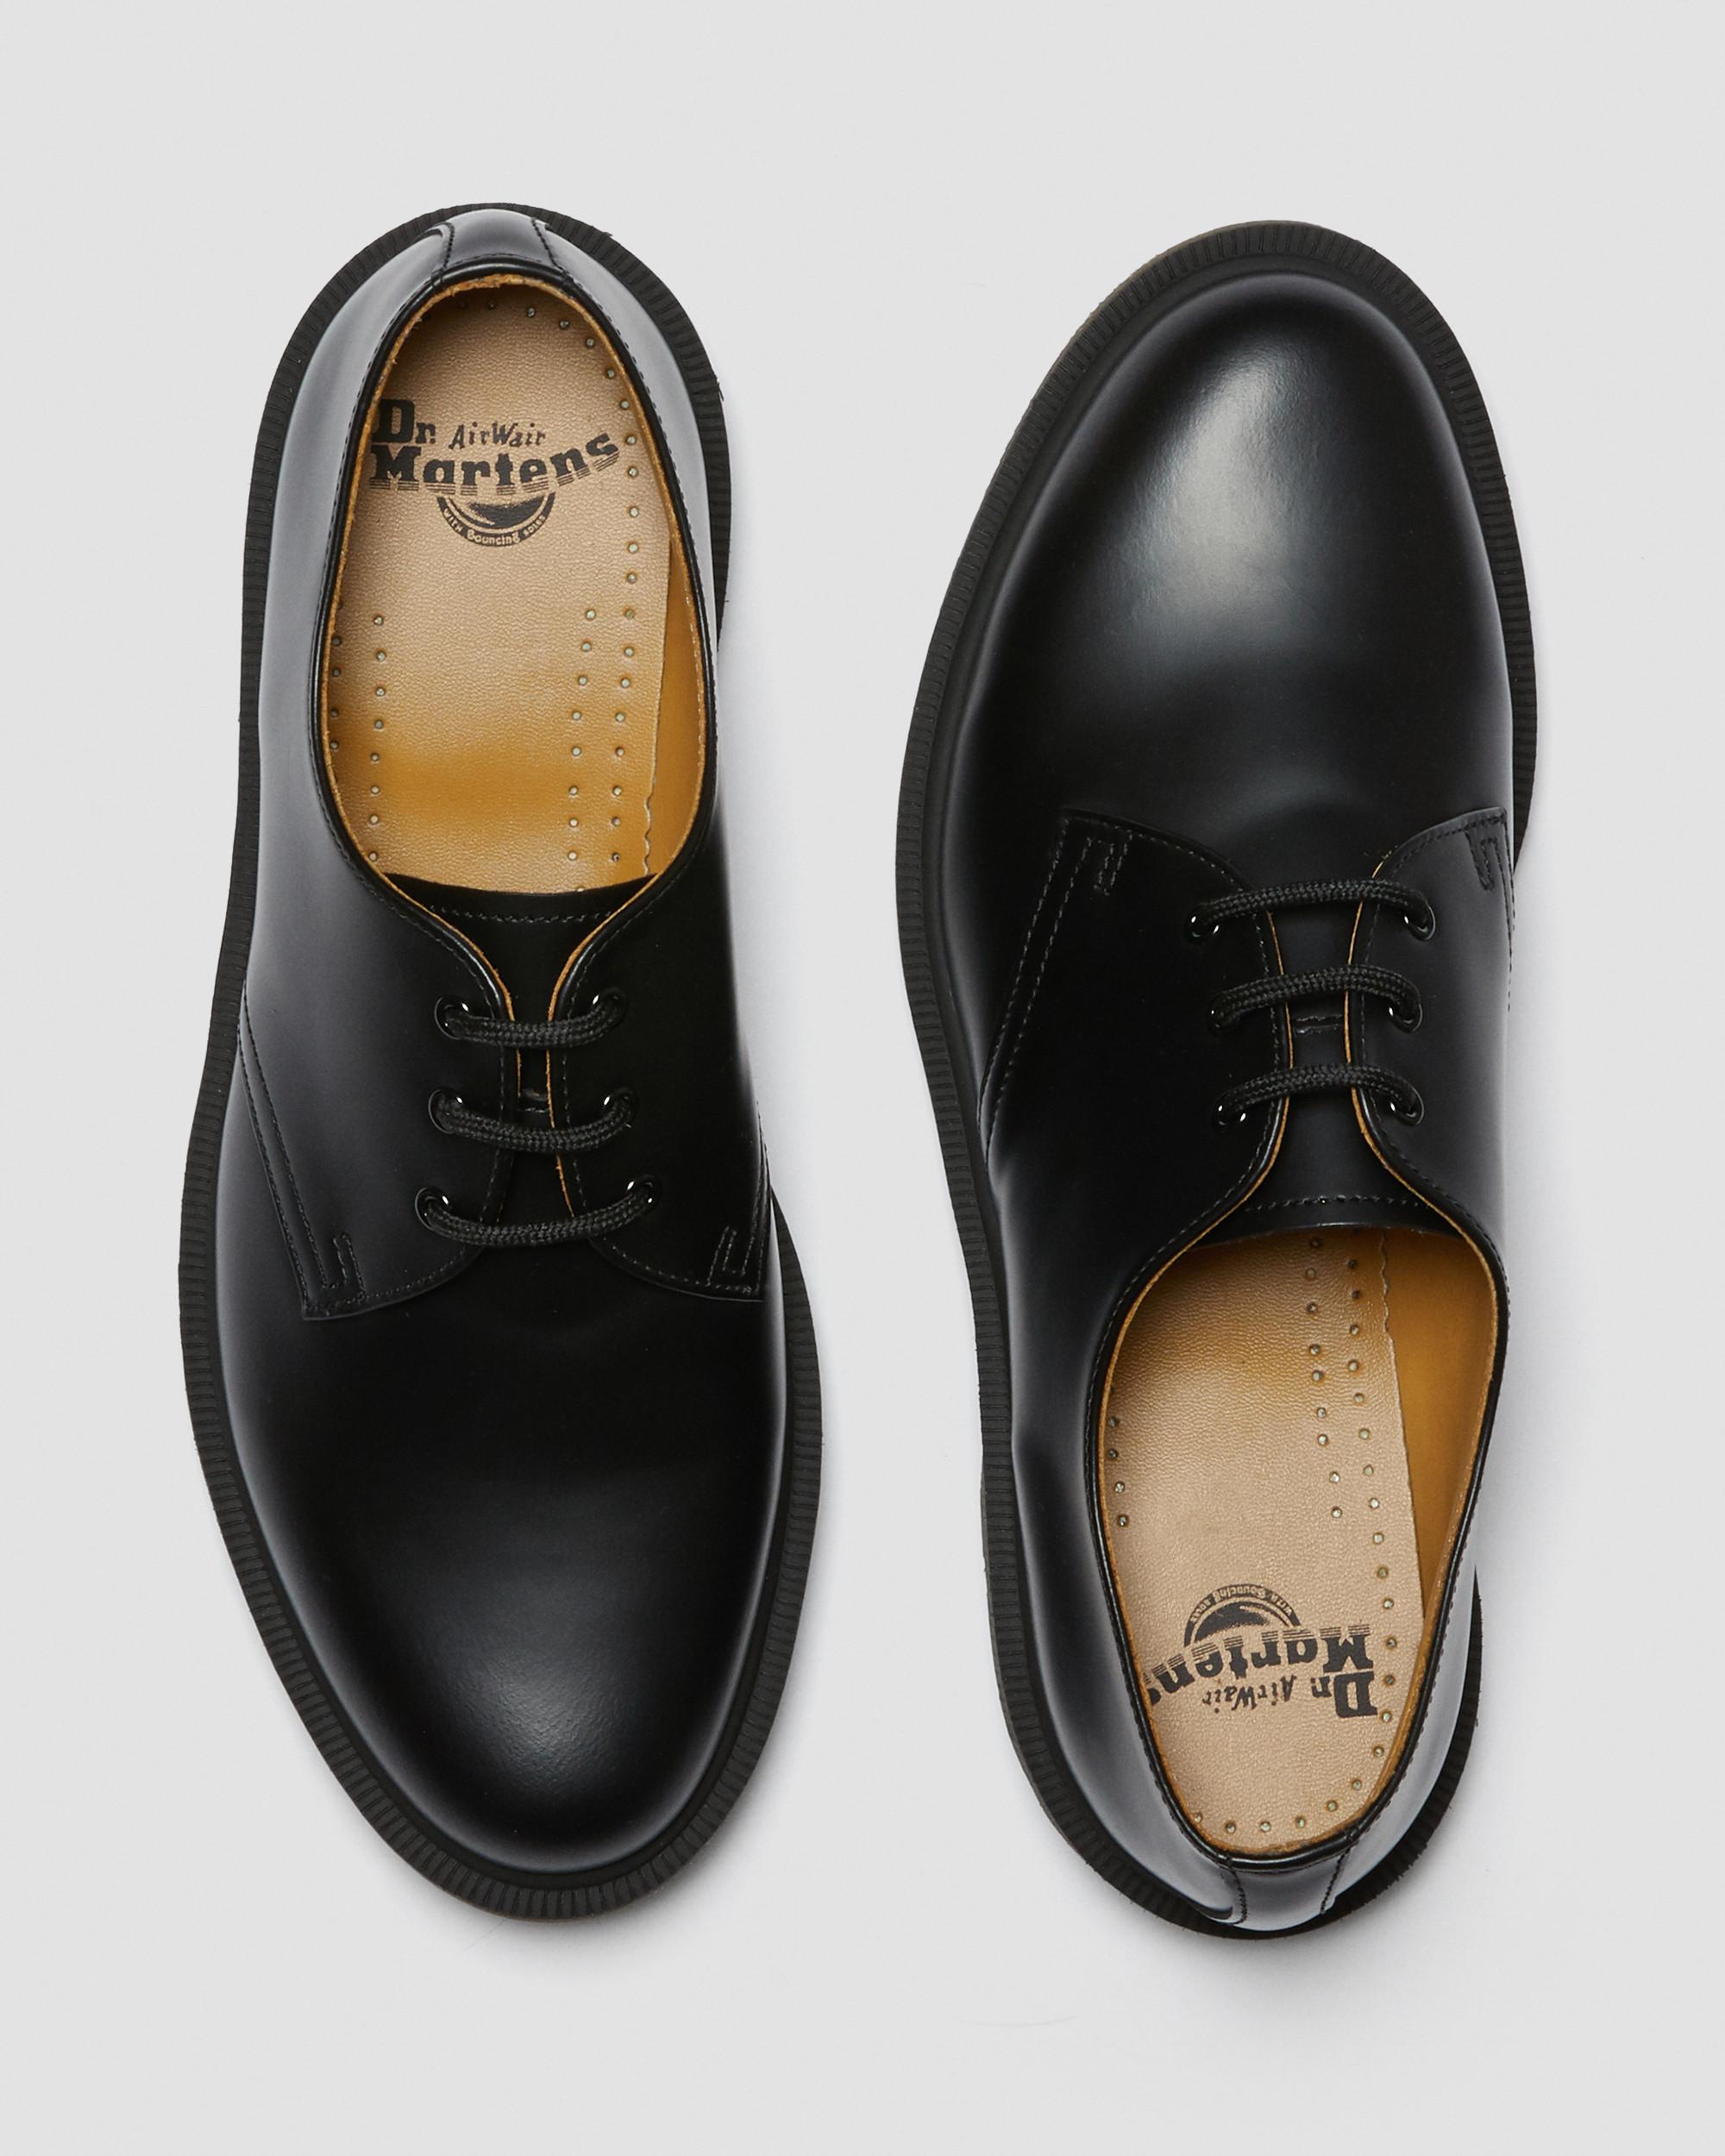 1461 Narrow Plain Welt Smooth Leather Oxford Shoes1461 Narrow Plain Welt Smooth Leather Oxford Shoes Dr. Martens